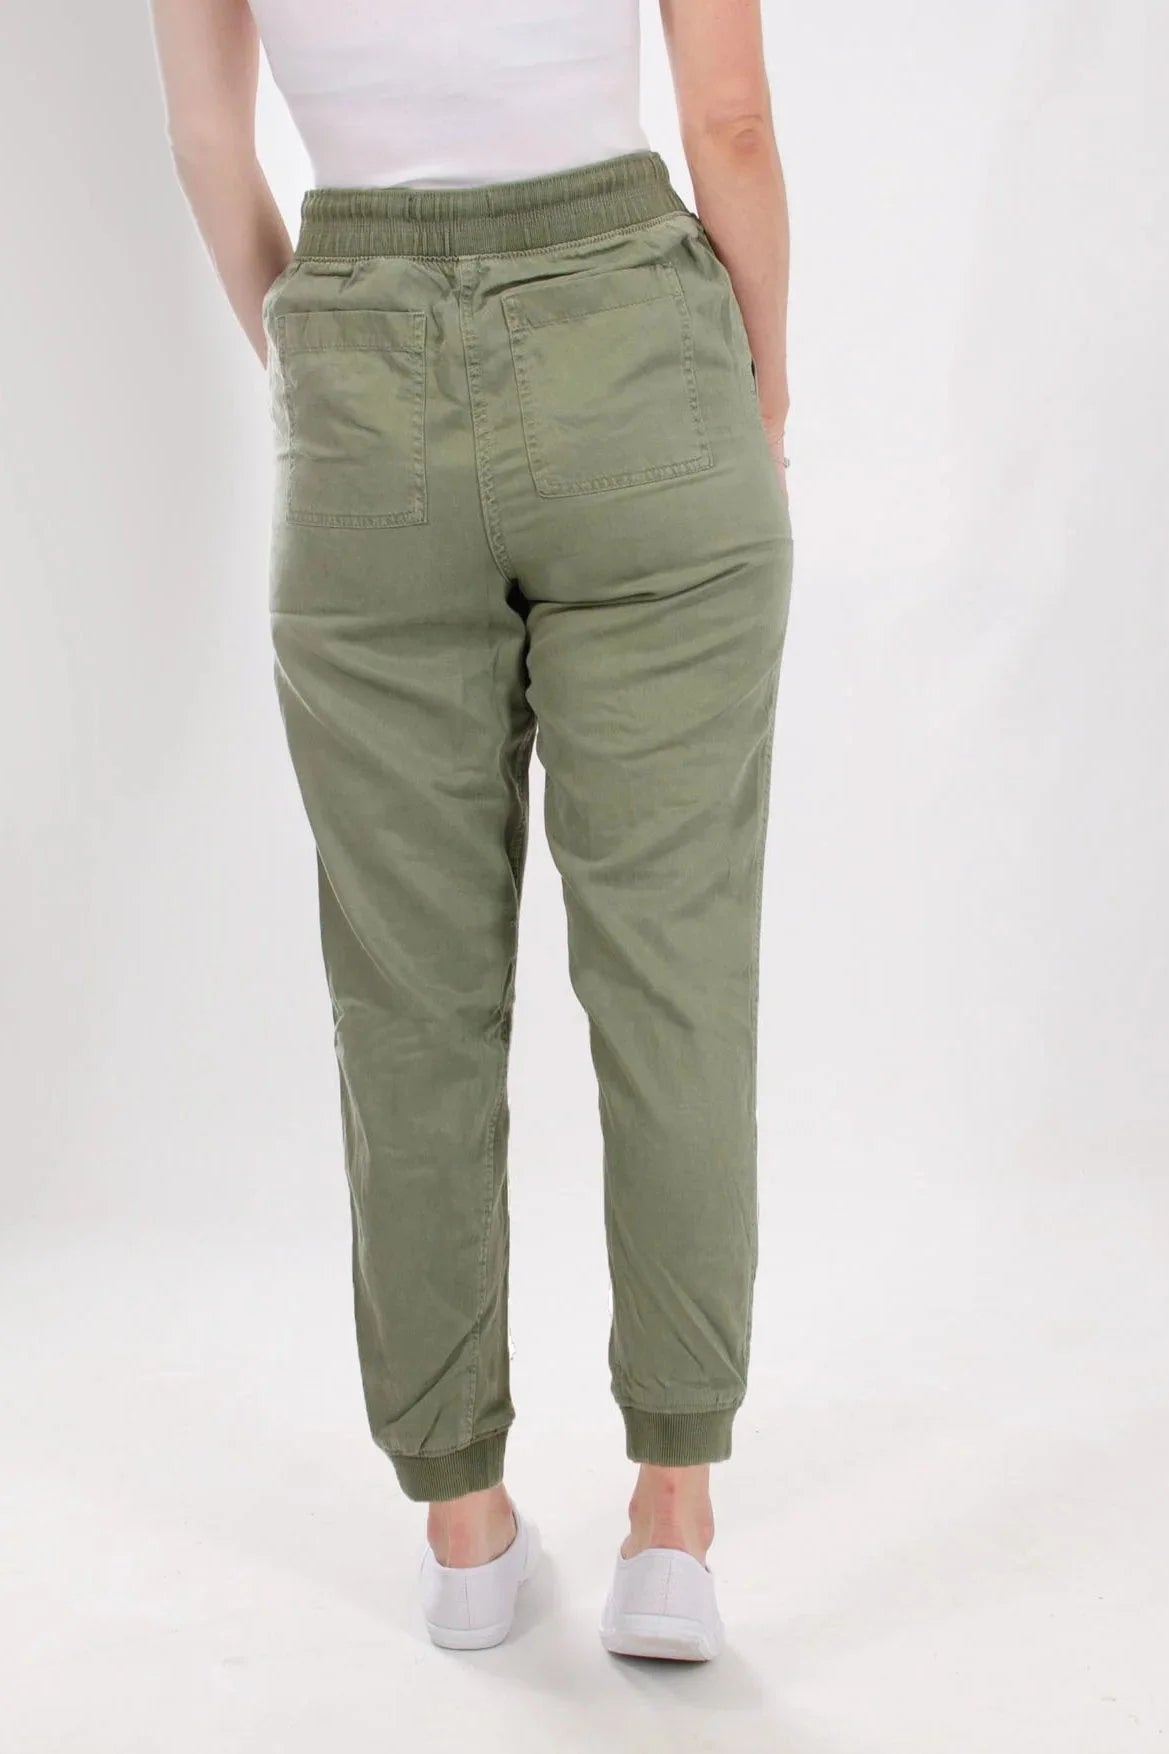 M&S Ankle Cuff Jogger Pants